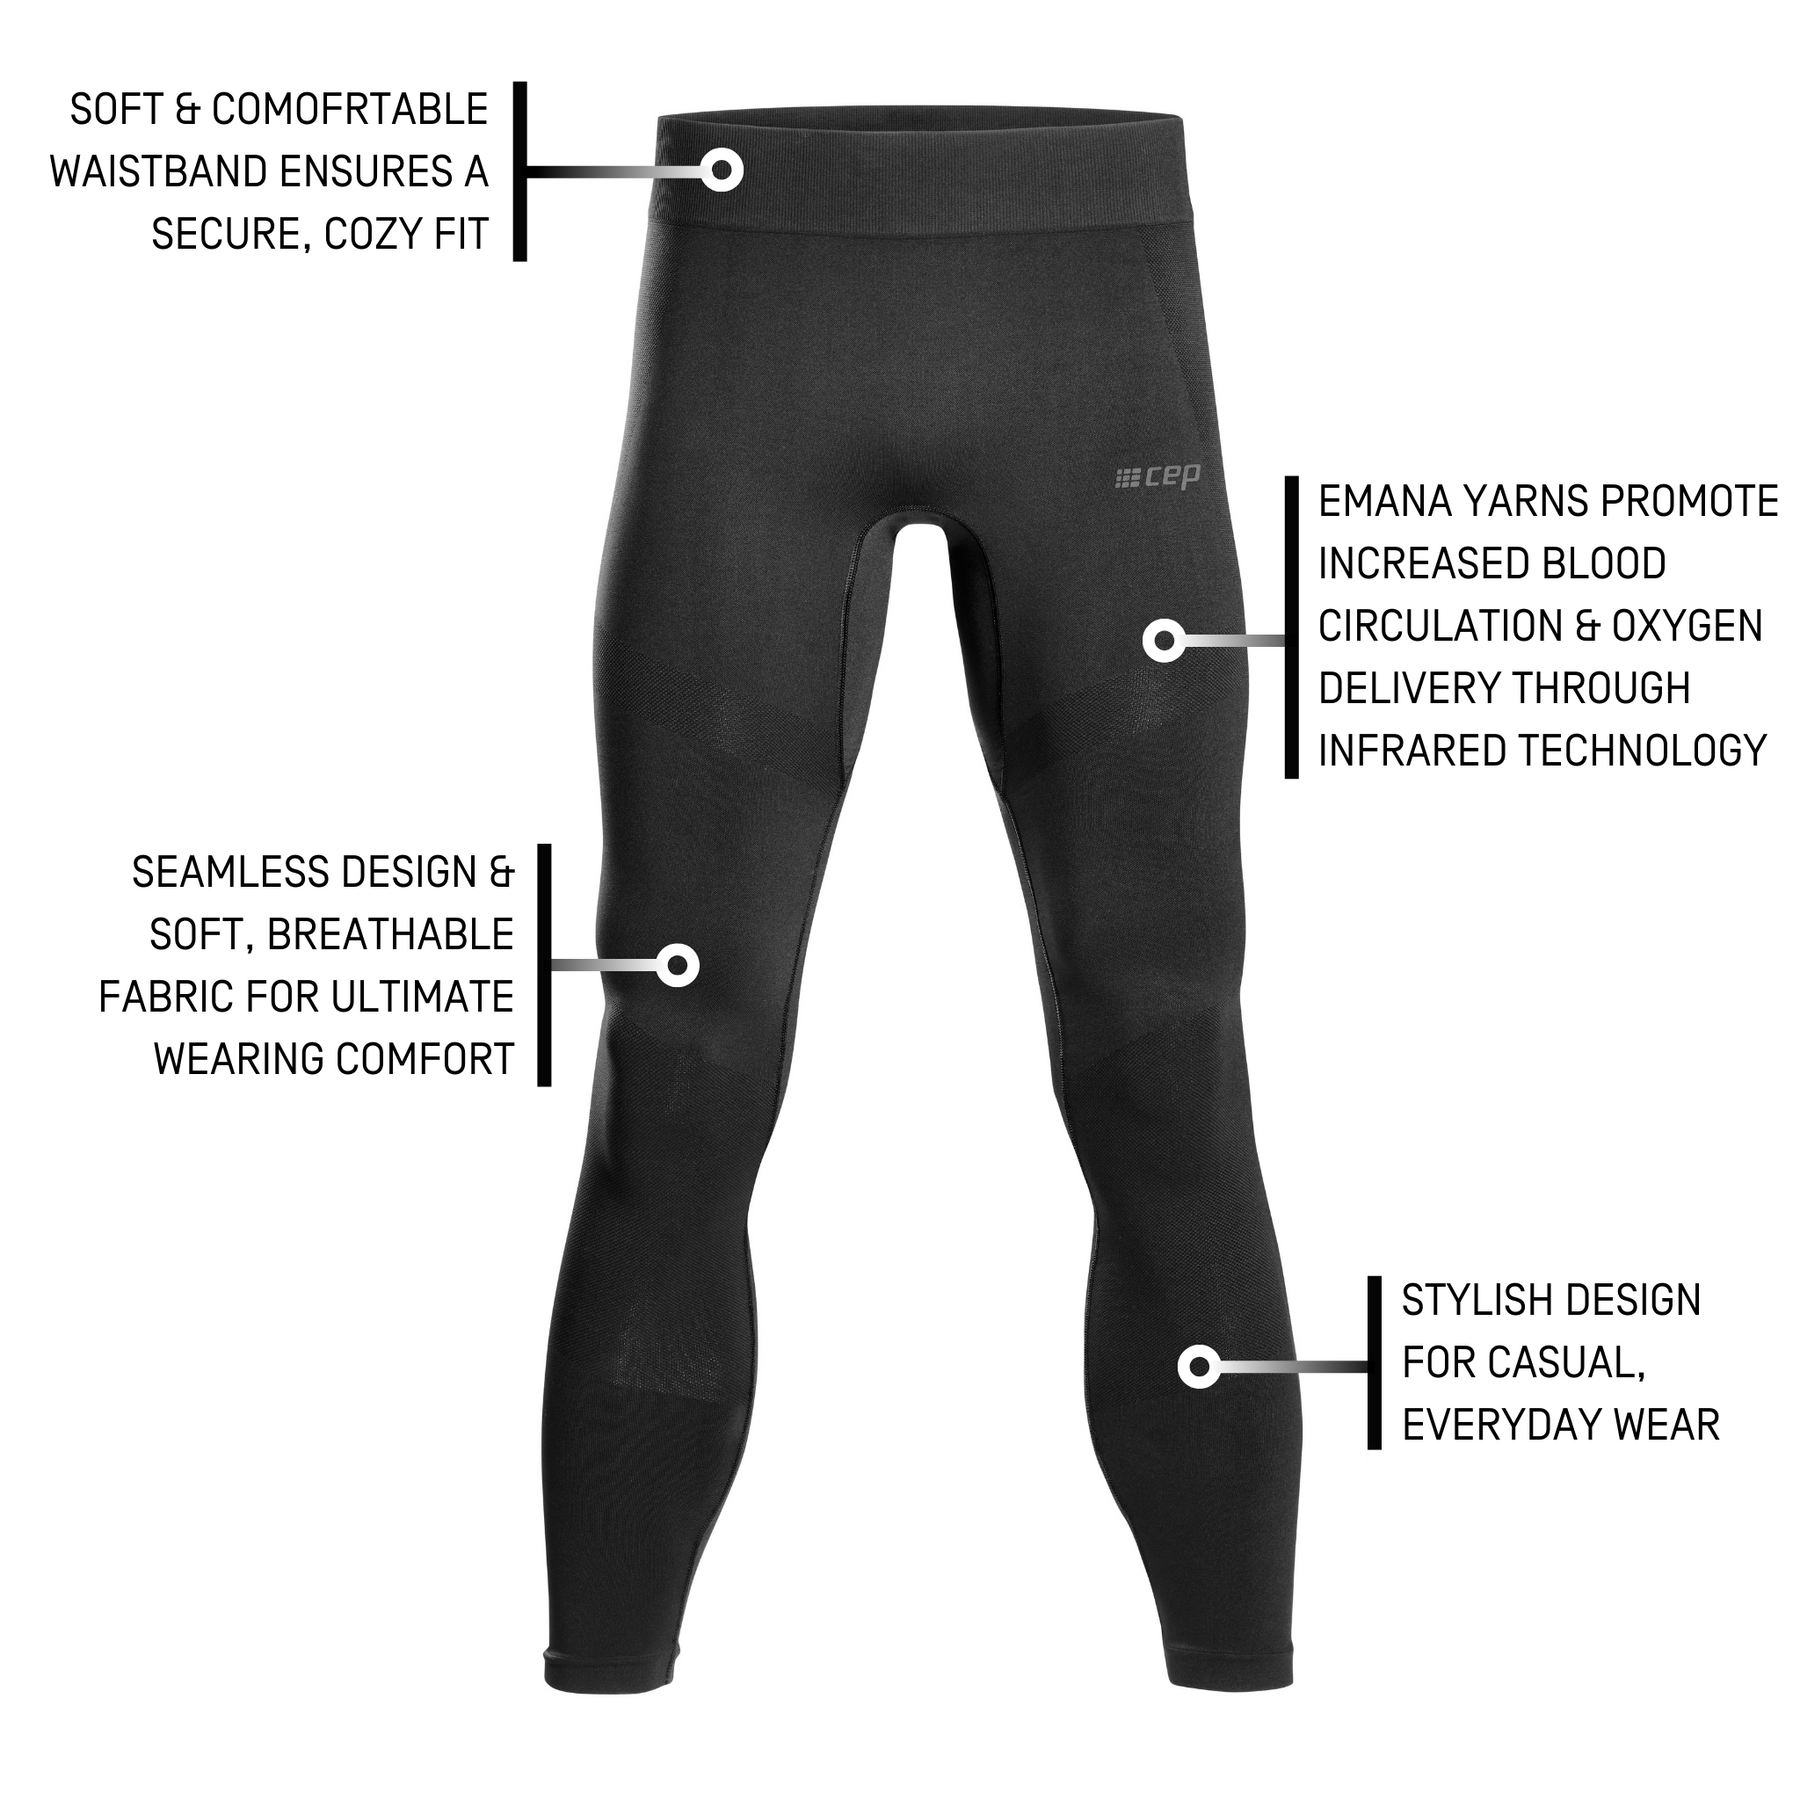 ANTI X PROOF NEW $68 Seamless Compression Legging in Chocolate